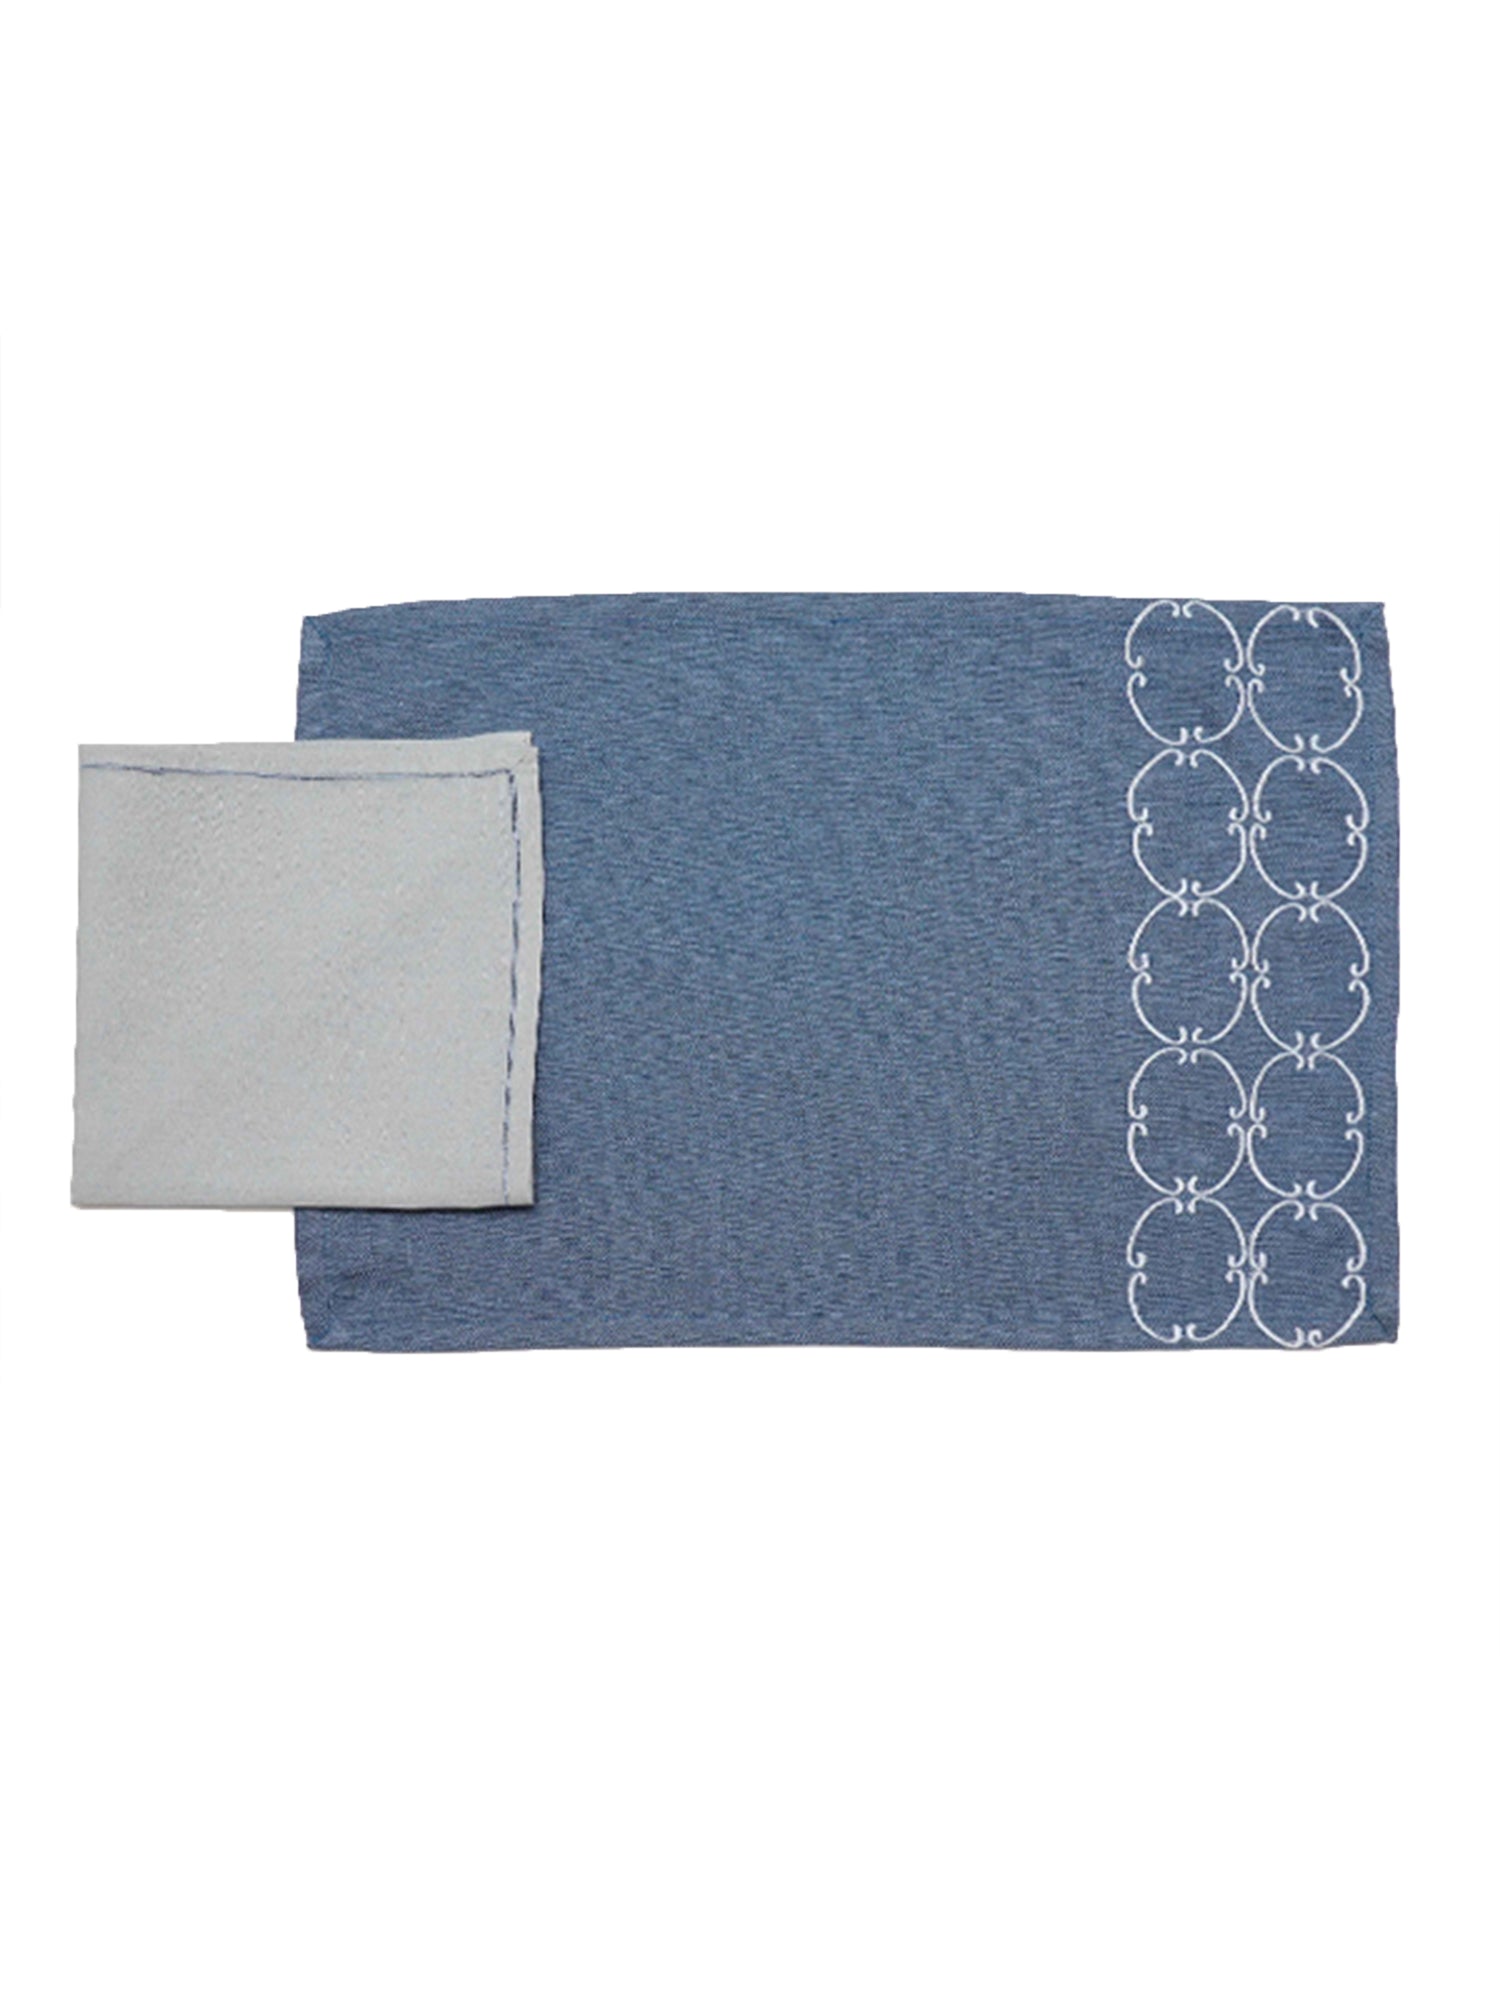 embroidered dinner table placemats and embroidered napkins set of 6 each in blue shades - 13x19 inch 